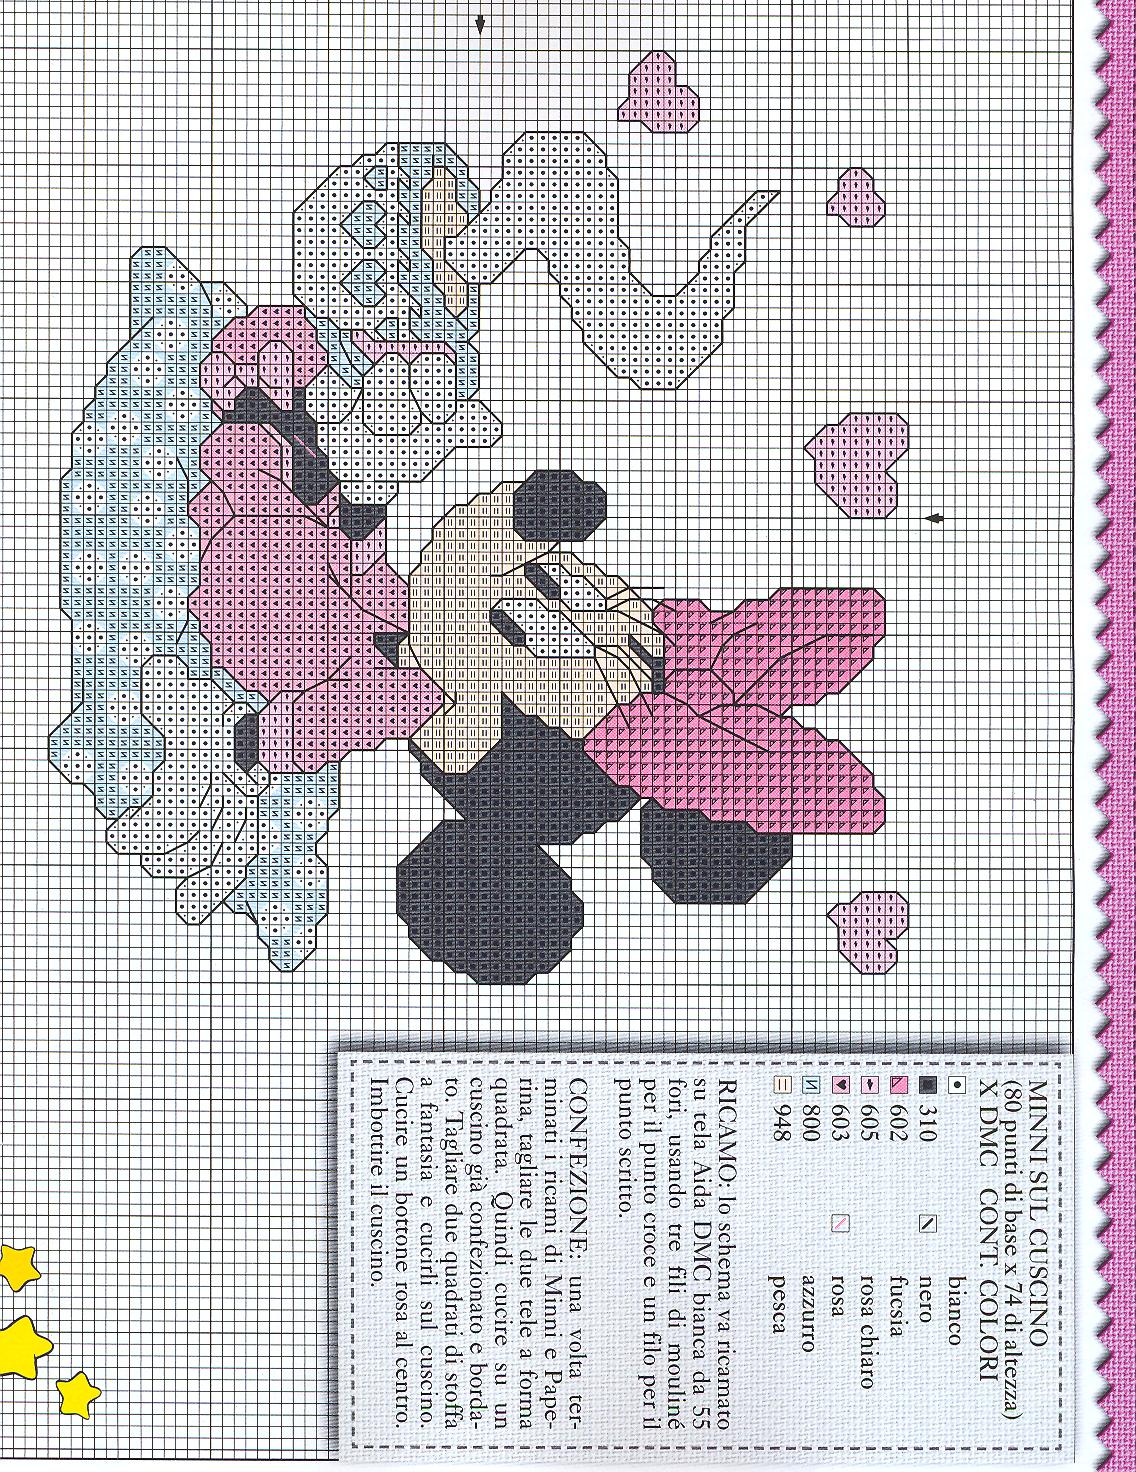 Disney characters in pajamas cross stitch (3)